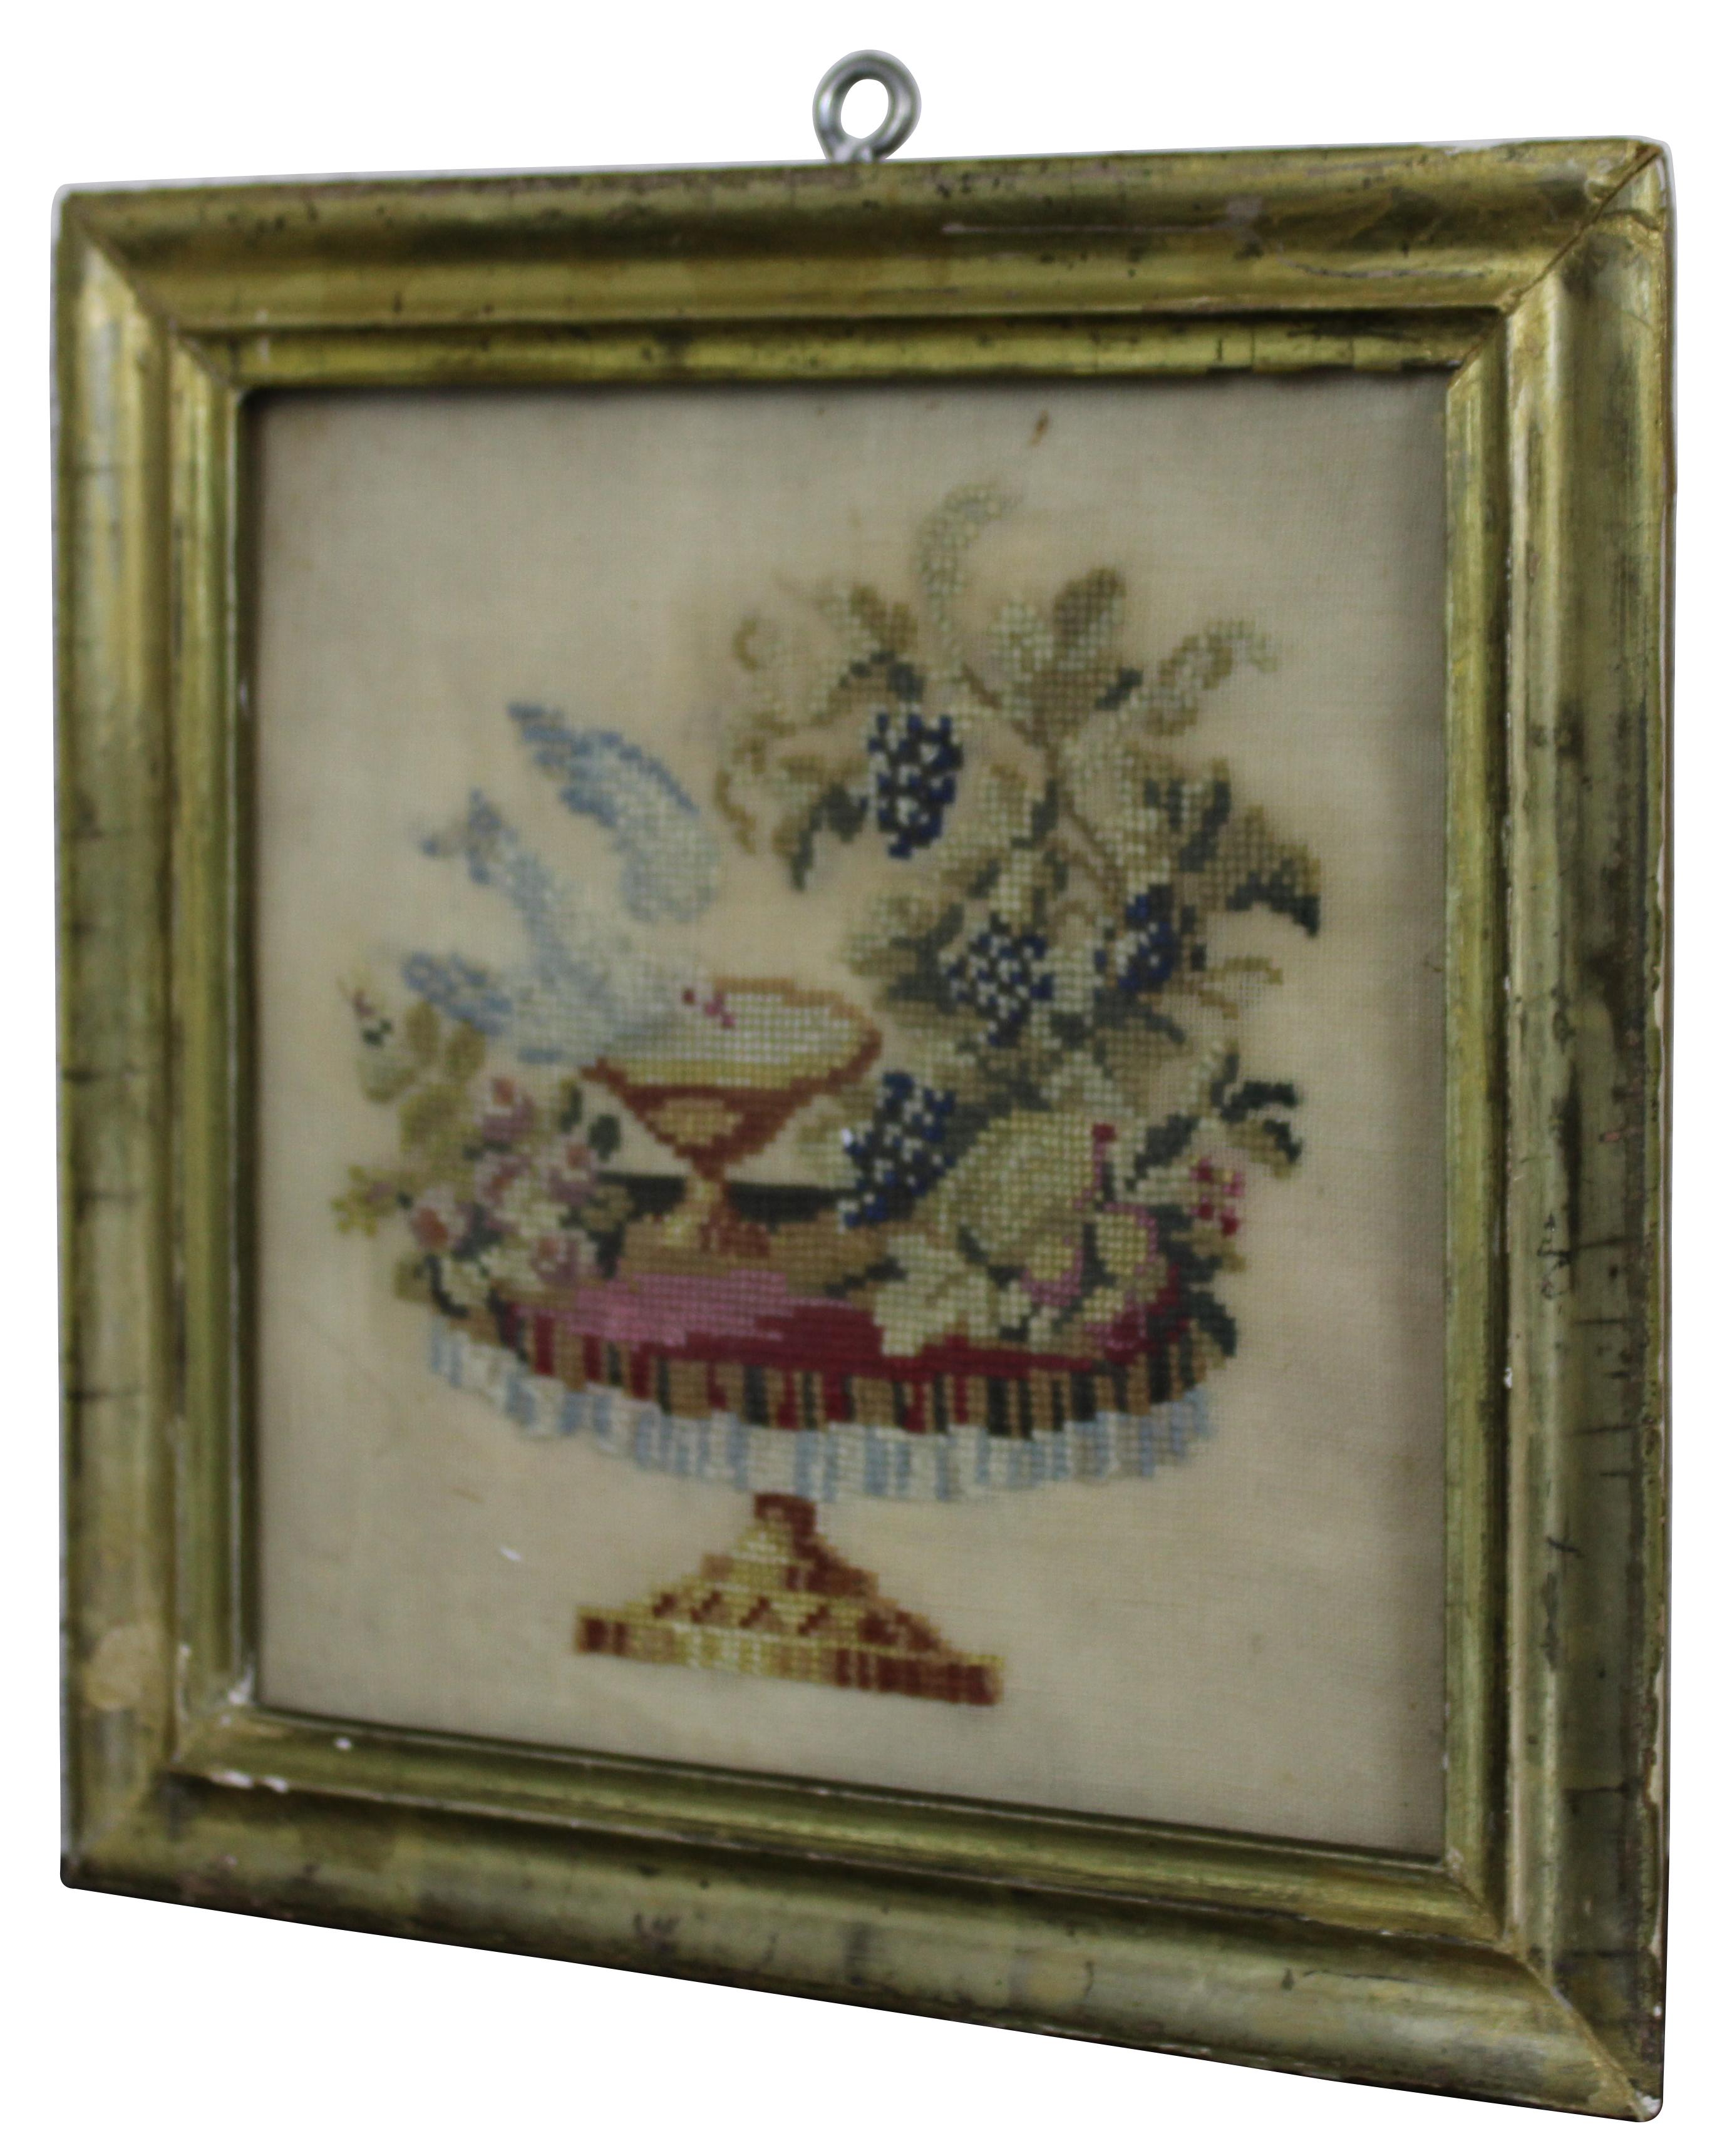 Antique mid 19th century folk art embroidery sampler showing a small pedestal table set with flowers, grapes, and a dove drinking or bathing in a bird bath.

Measures: 9” x 1” x 9” / Sans frame - 7” x 7” (width x depth x height).
     